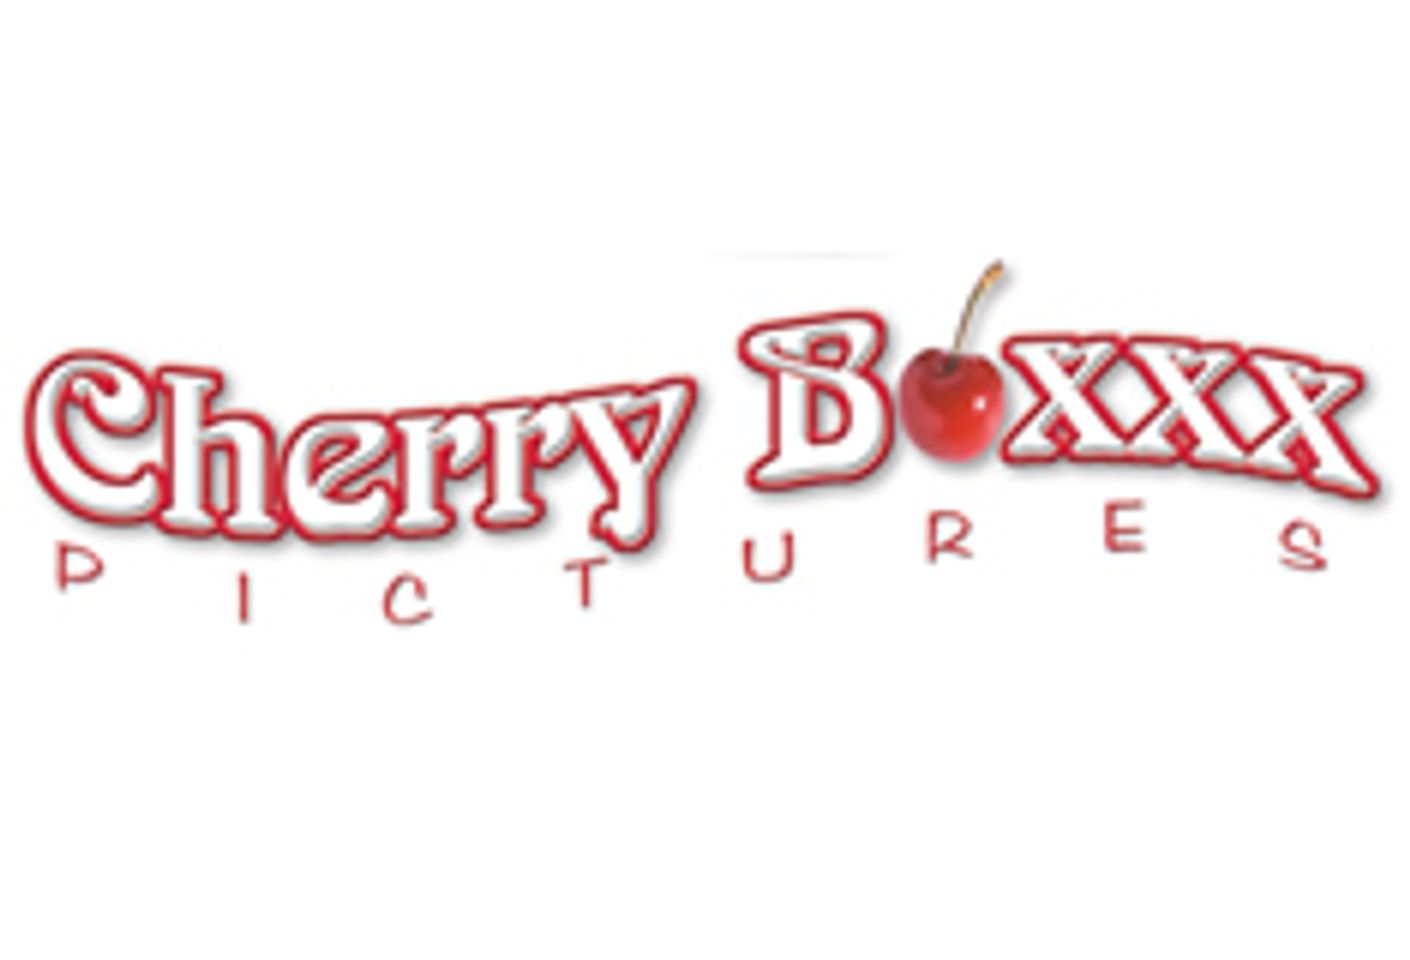 Cherry Boxxx Pictures Wraps 'Watch Me 2' with Sunny Leone